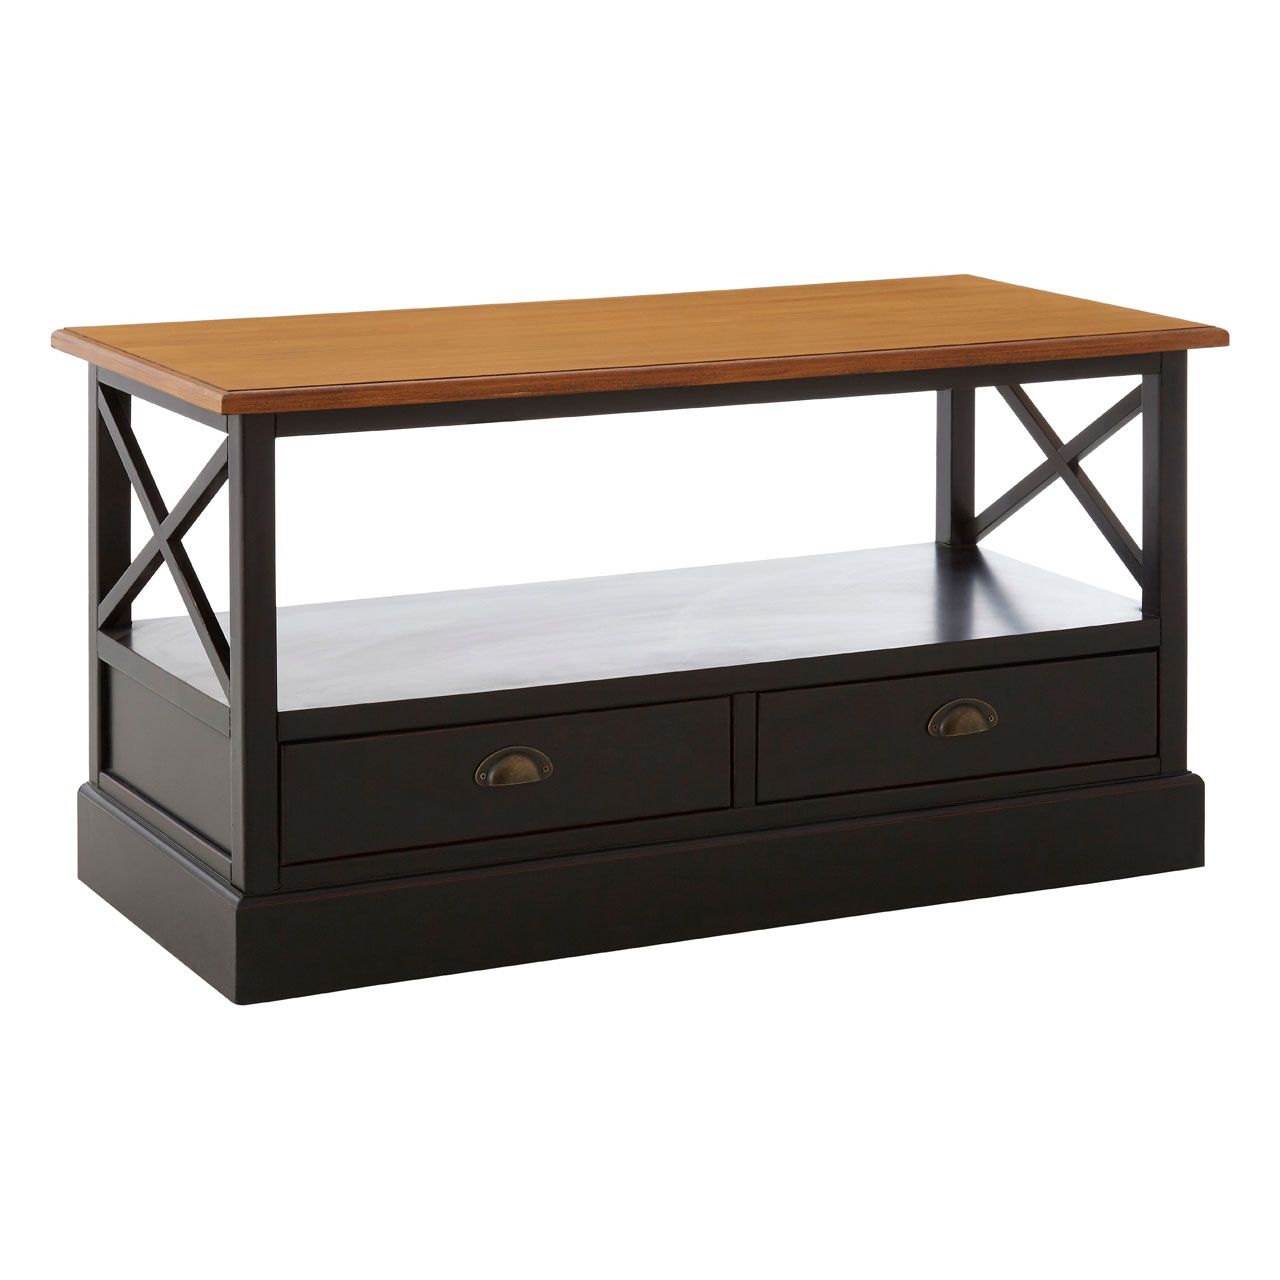 Virginia Wooden Coffee Table In Black With 2 Drawers